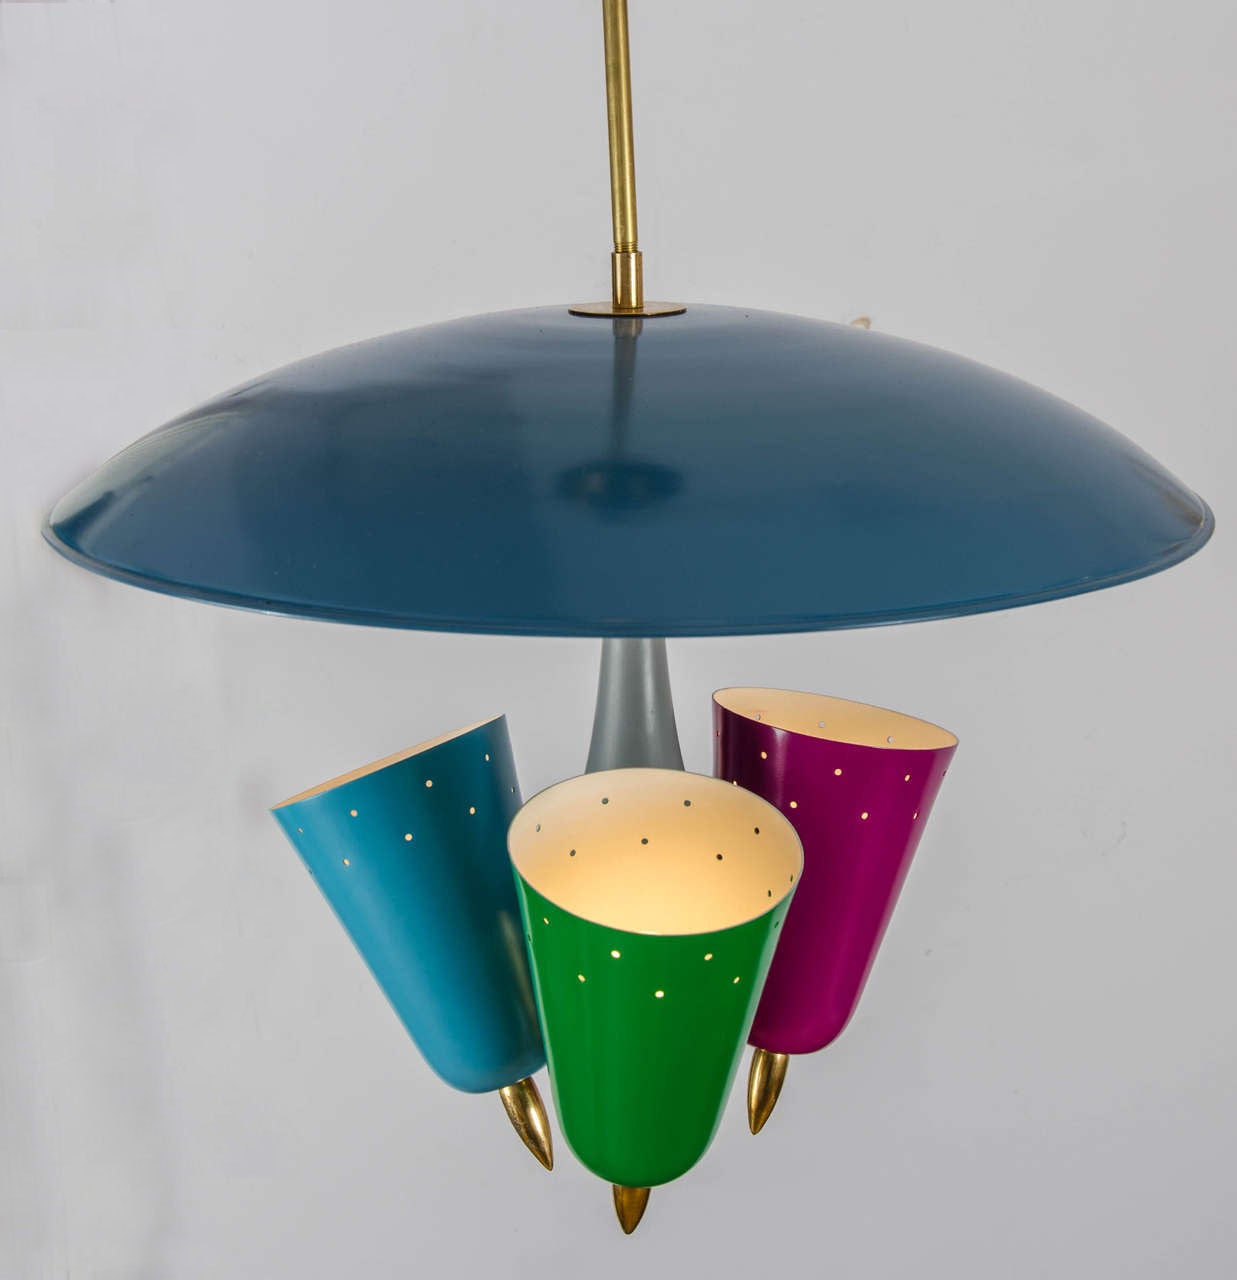 Five colored metal pendant has three adjustable in green, blue and purple round cone shaped light sources in spun aluminium attach to brass fittings leading to a central umbrella shaped light reflecting shade hanging over the lights.
Mid-Century